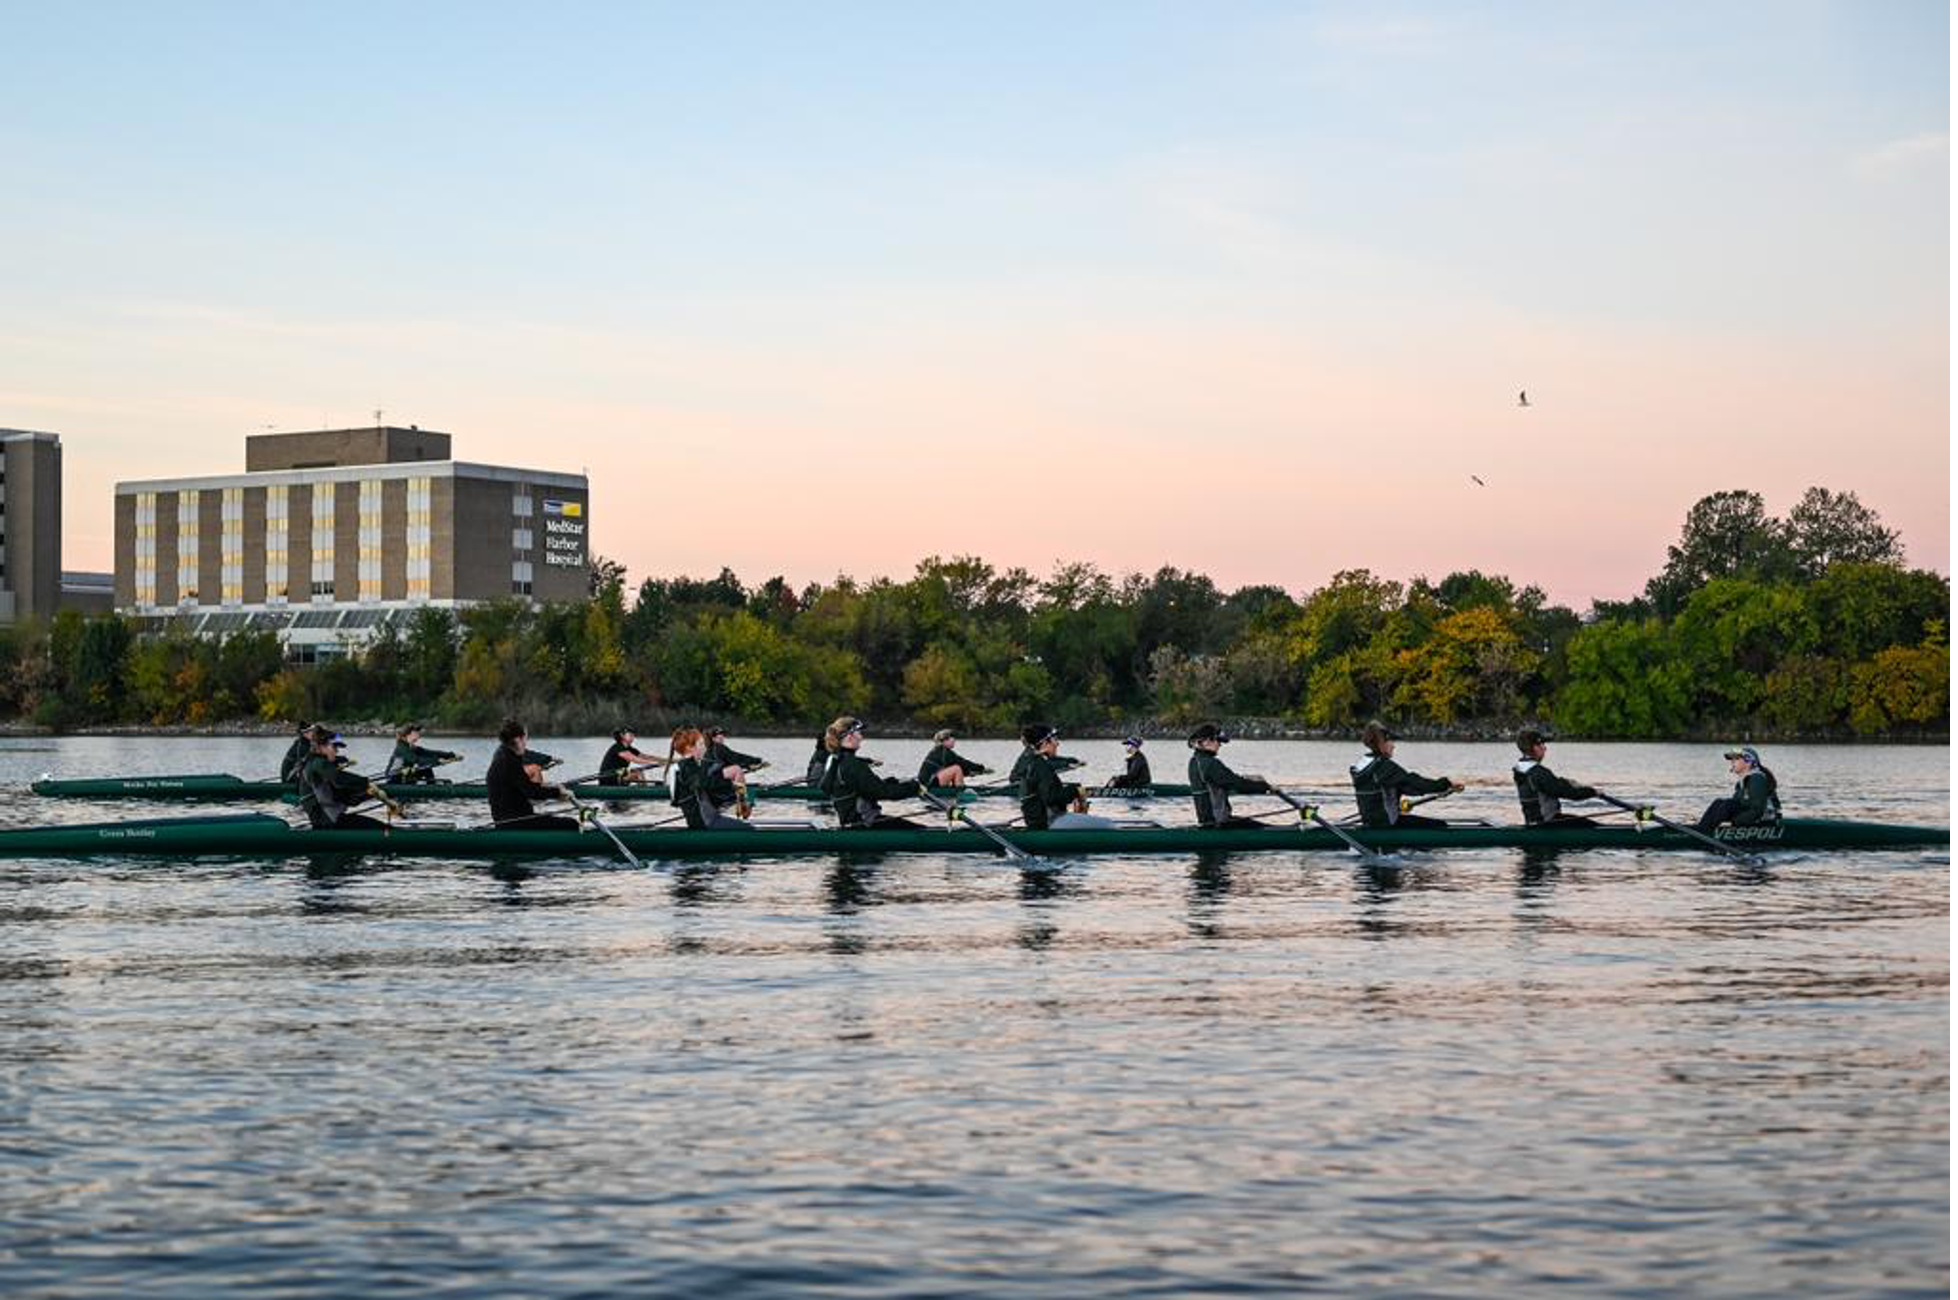 Loyola Women’s Rowing Takes on Team Culture: How Positivity Helps Strengthen Their Team